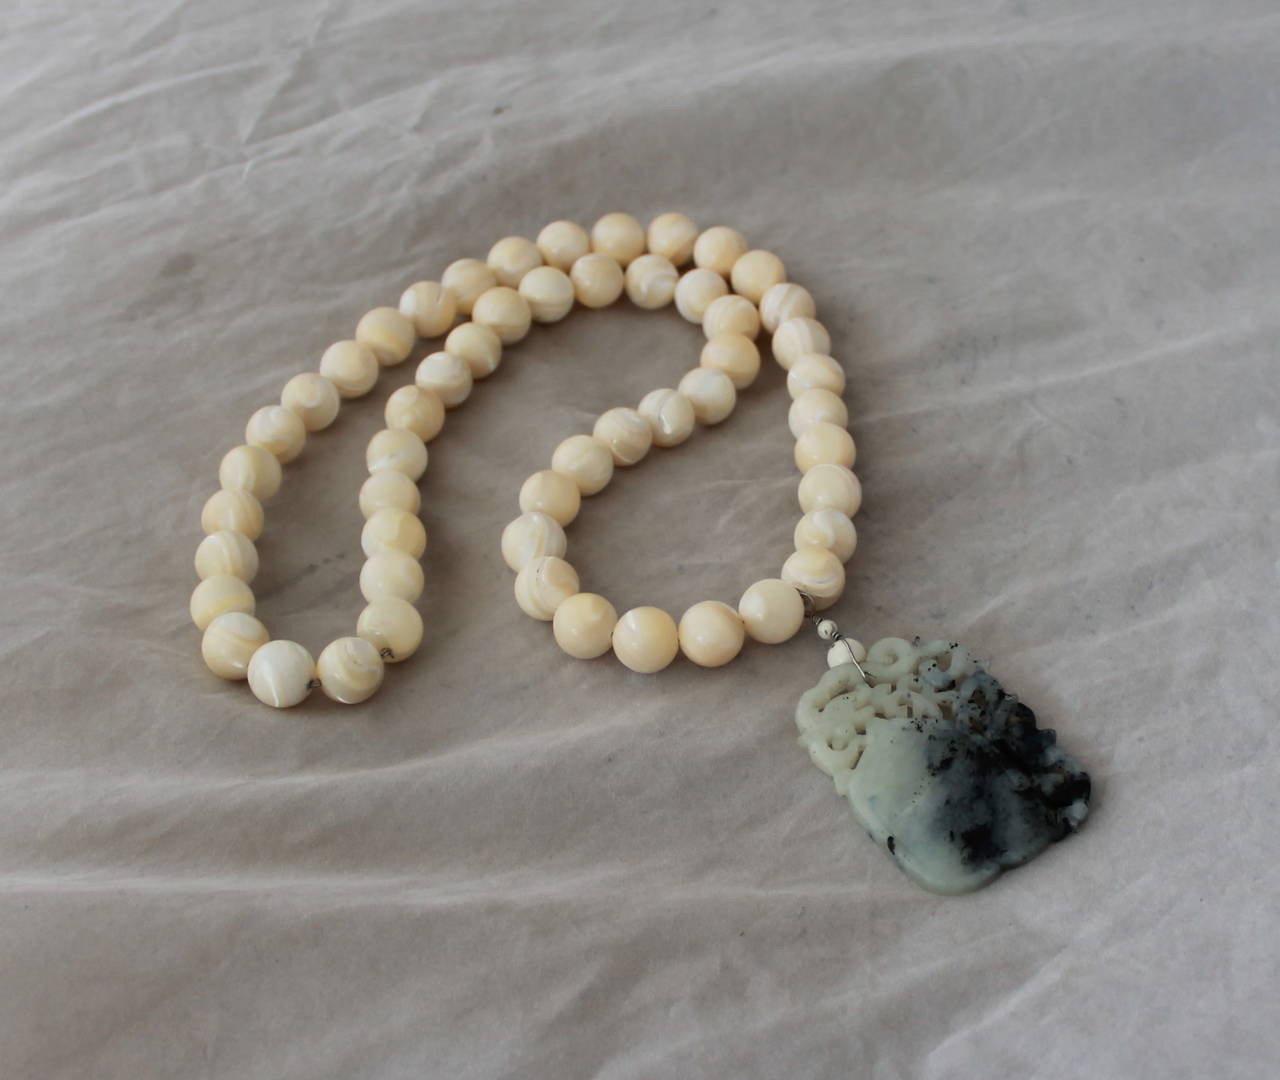 2000's Mother of Pearl Necklace with Carved White Jade Pendant. This piece is in excellent condition. The jade is carved into an Asianic design.

Necklace Bead Width- 0.5